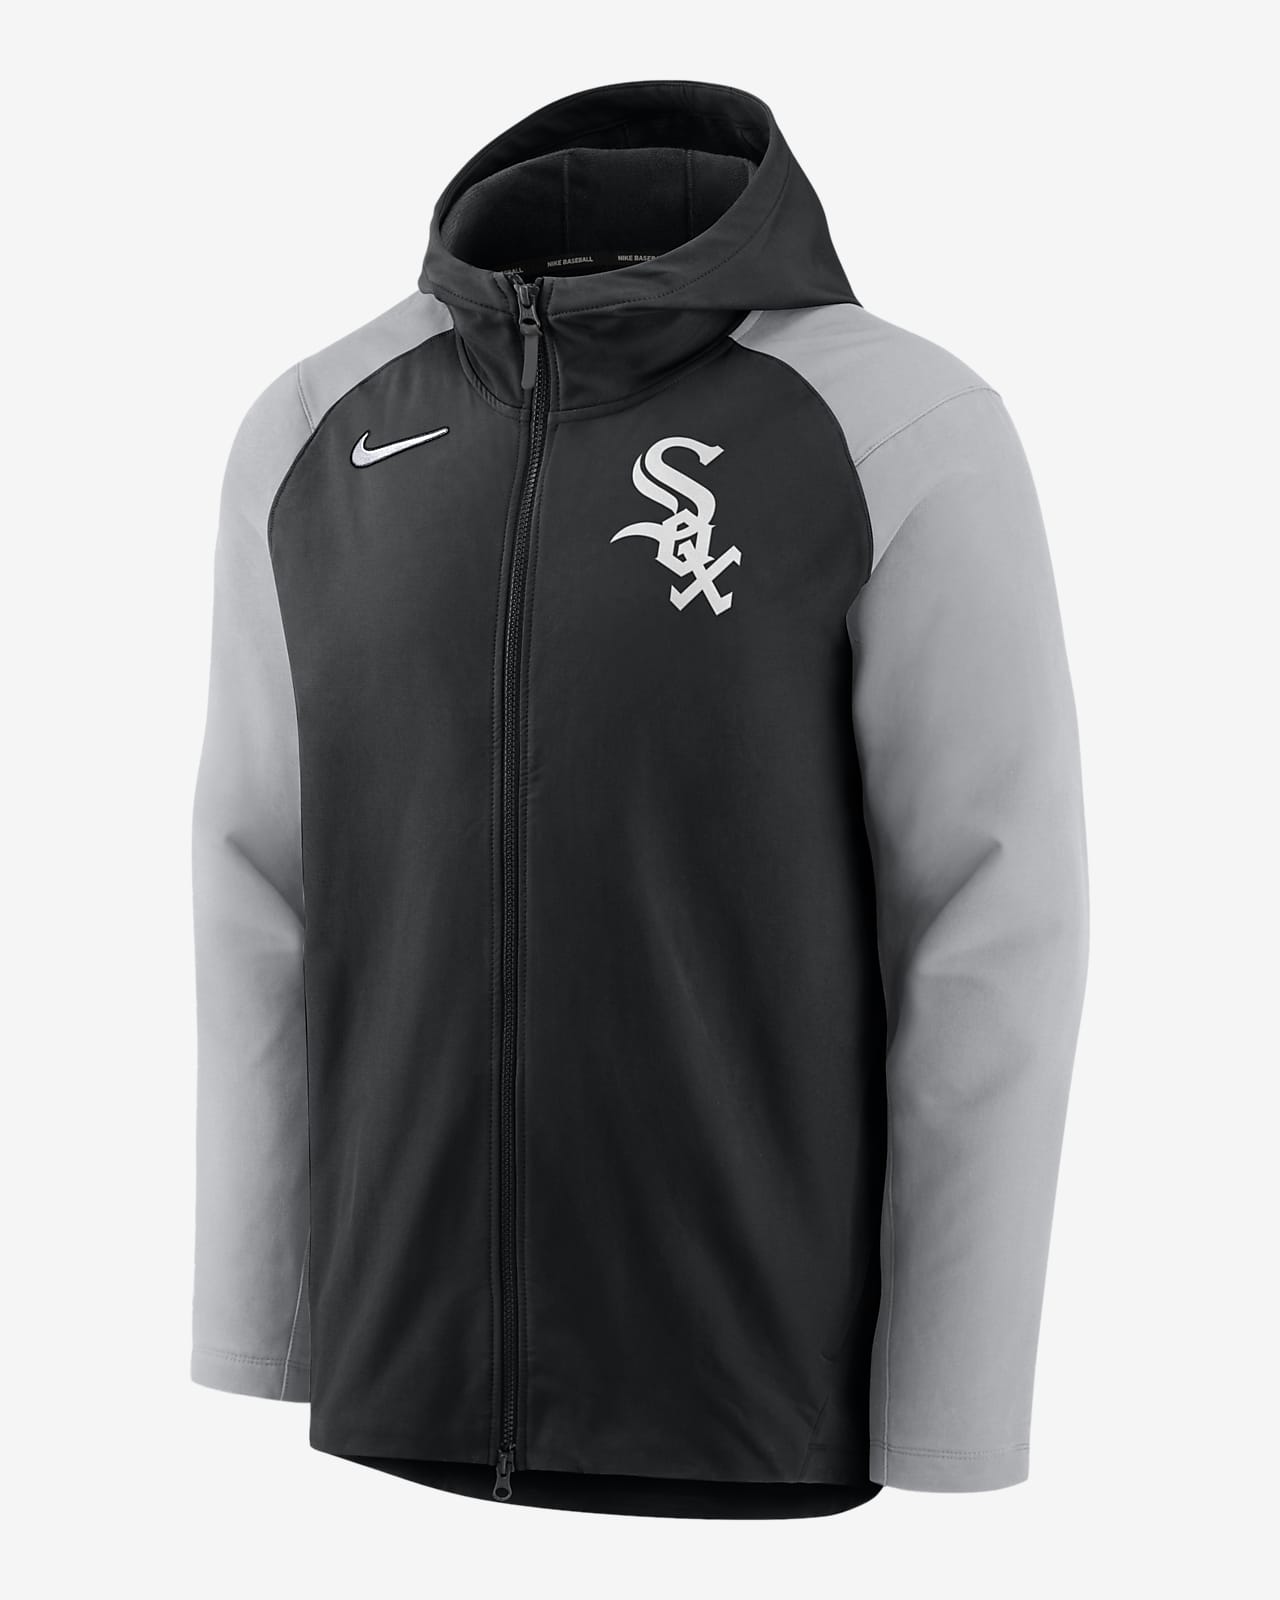 Nike Men's Dri-Fit City Connect (MLB Chicago White Sox) Hooded Short-Sleeve Top in Black, Size: Large | NKEK00ARX-2K7